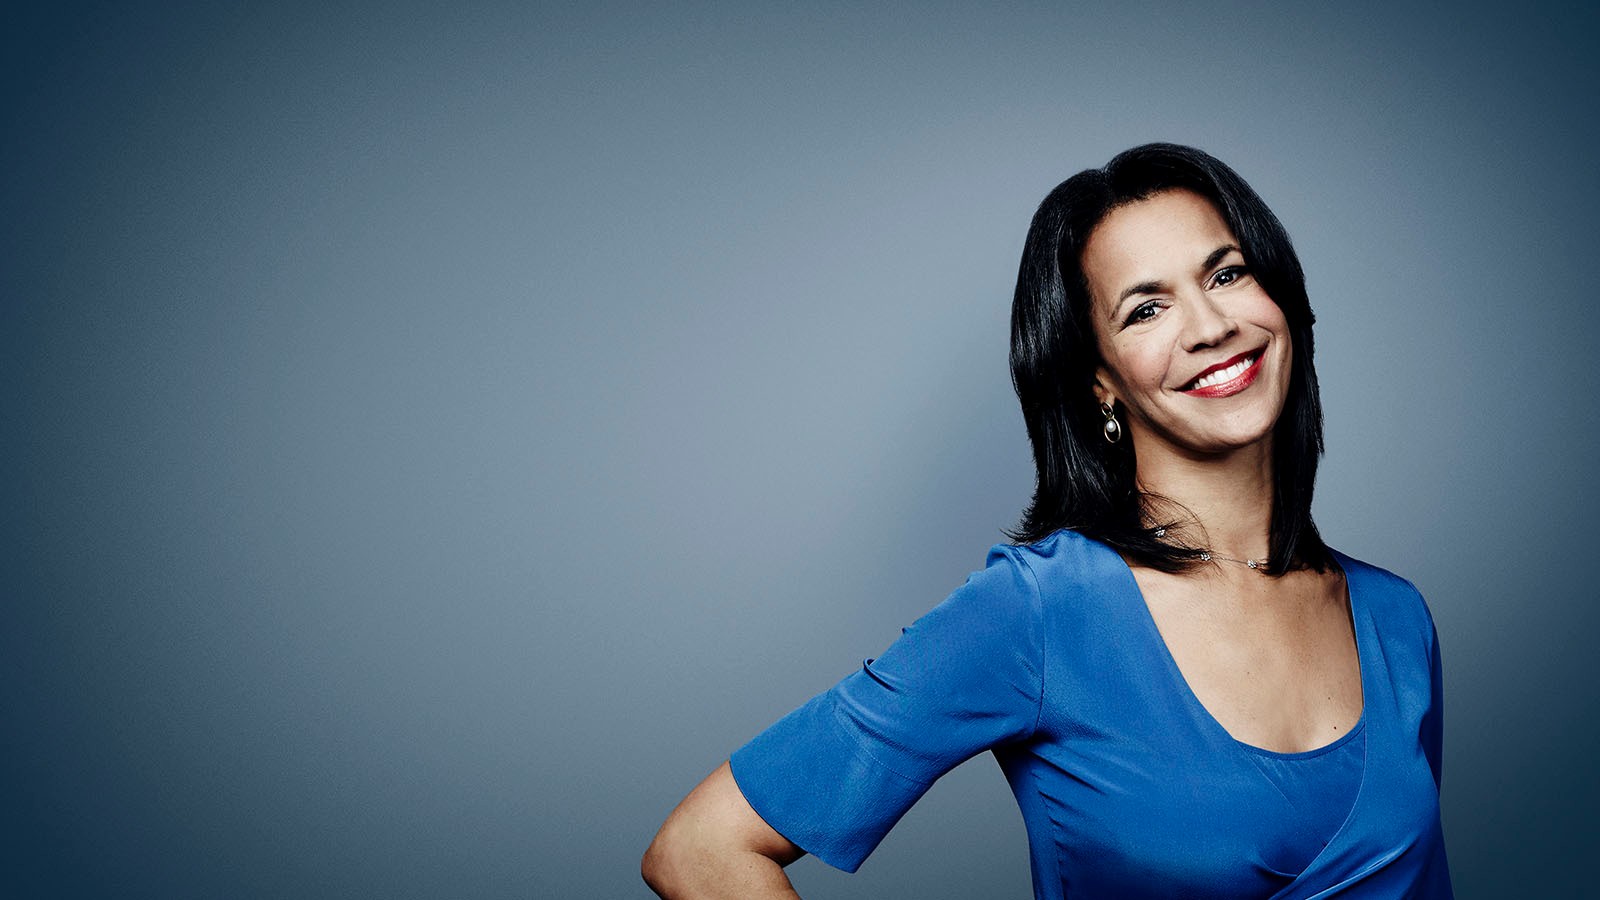 CNN Anchor Goes Blue for Cancer Awareness Campaign - wide 6